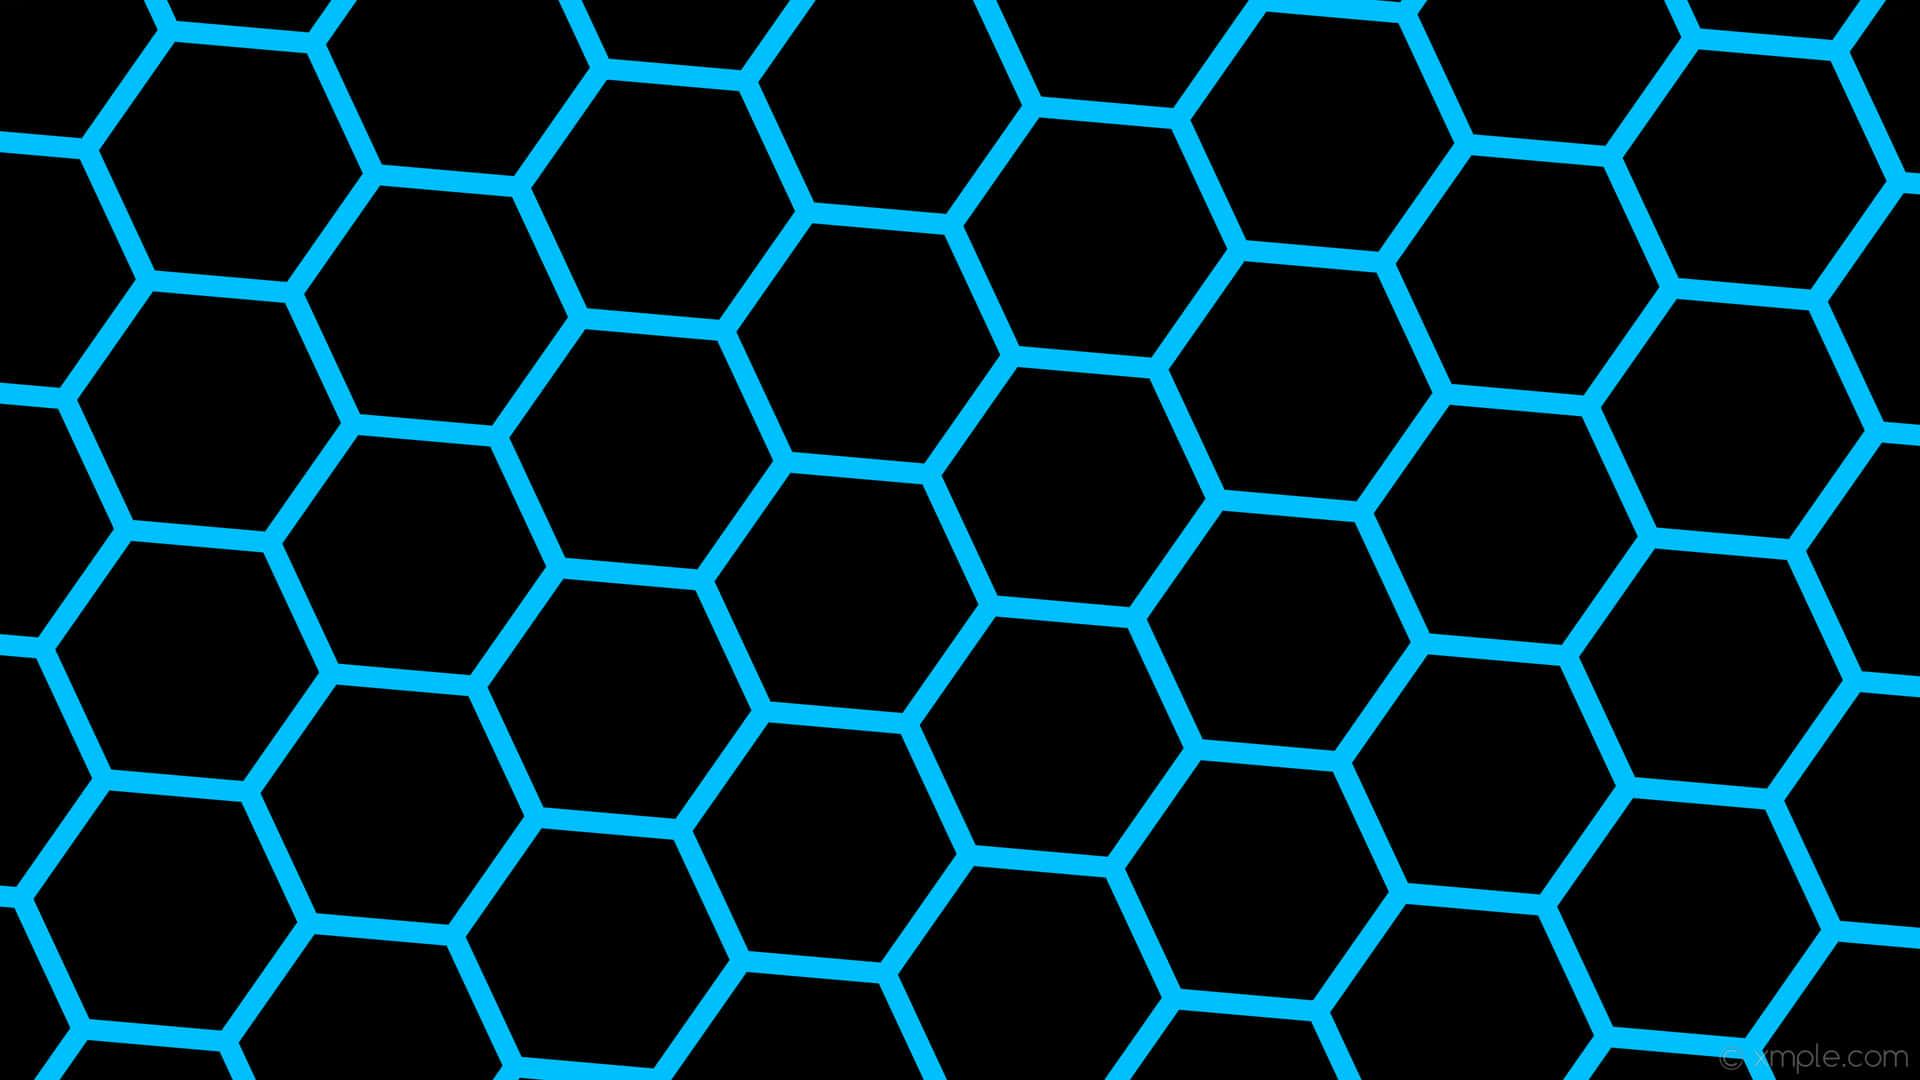 Intricate Shapes of Colorful Hexagons Wallpaper